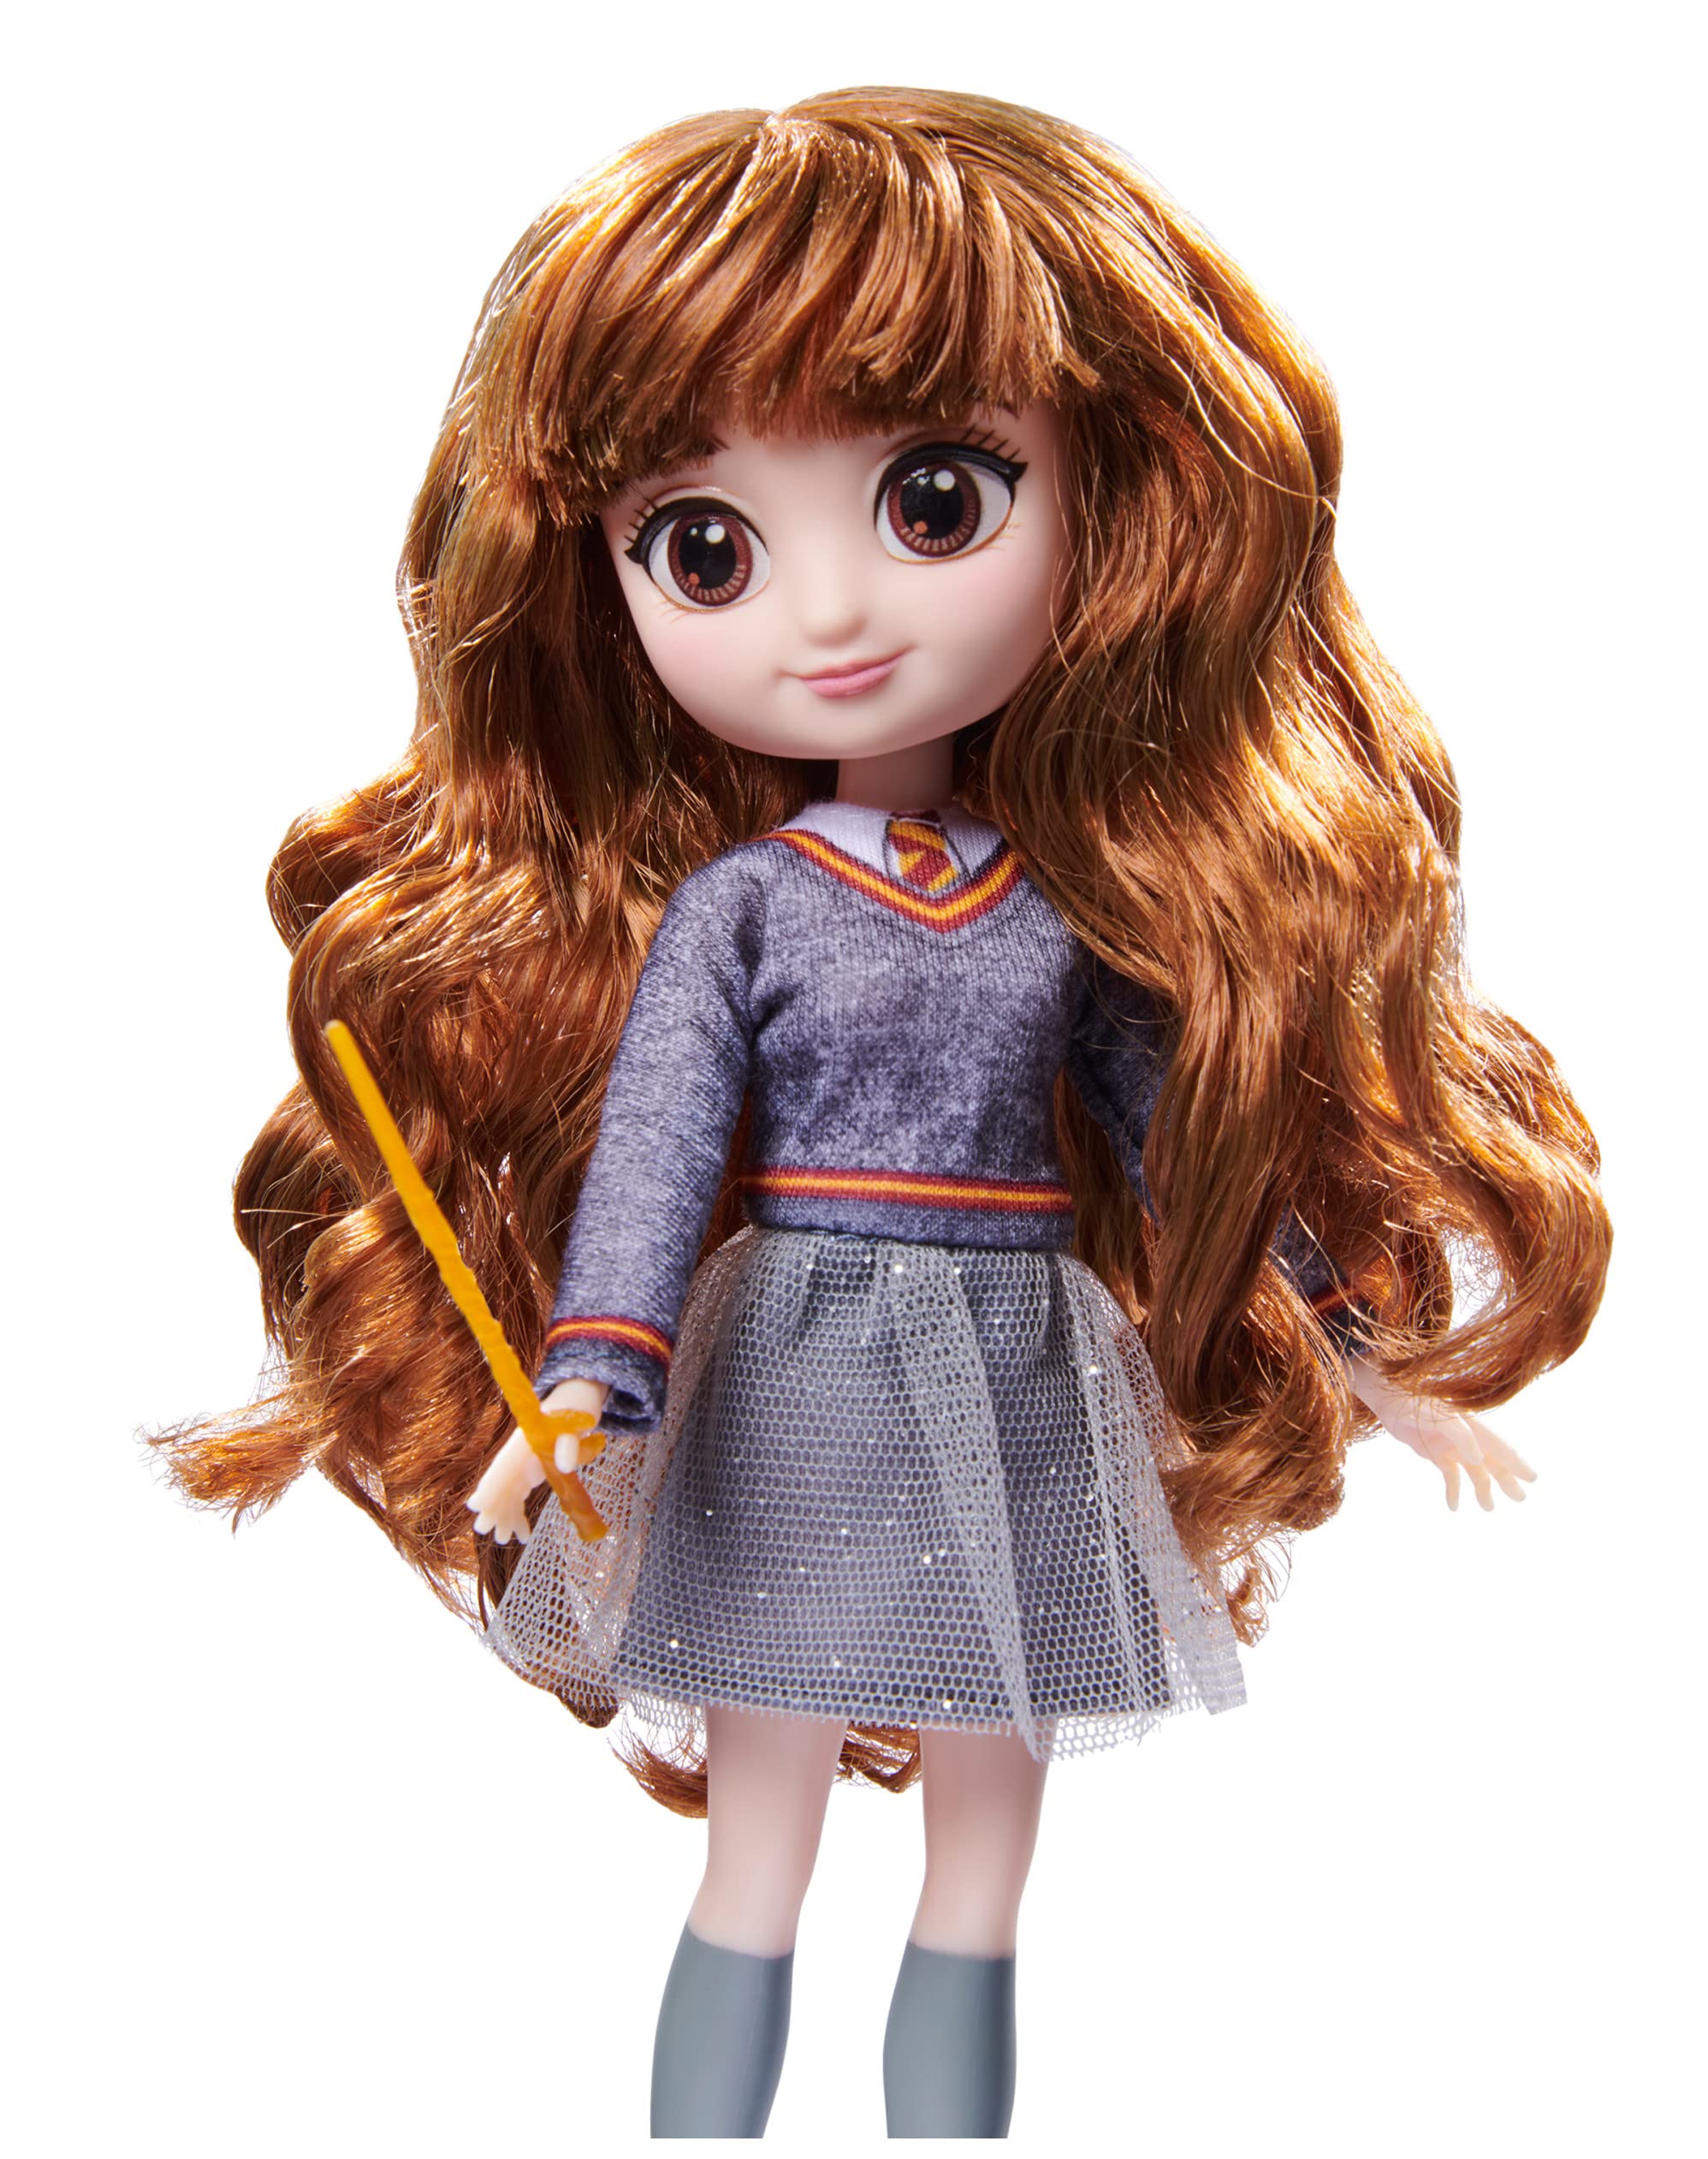 Wizarding World Harry Potter, 8-inch Hermione Granger Doll, Kids Toys for Ages 5 and up